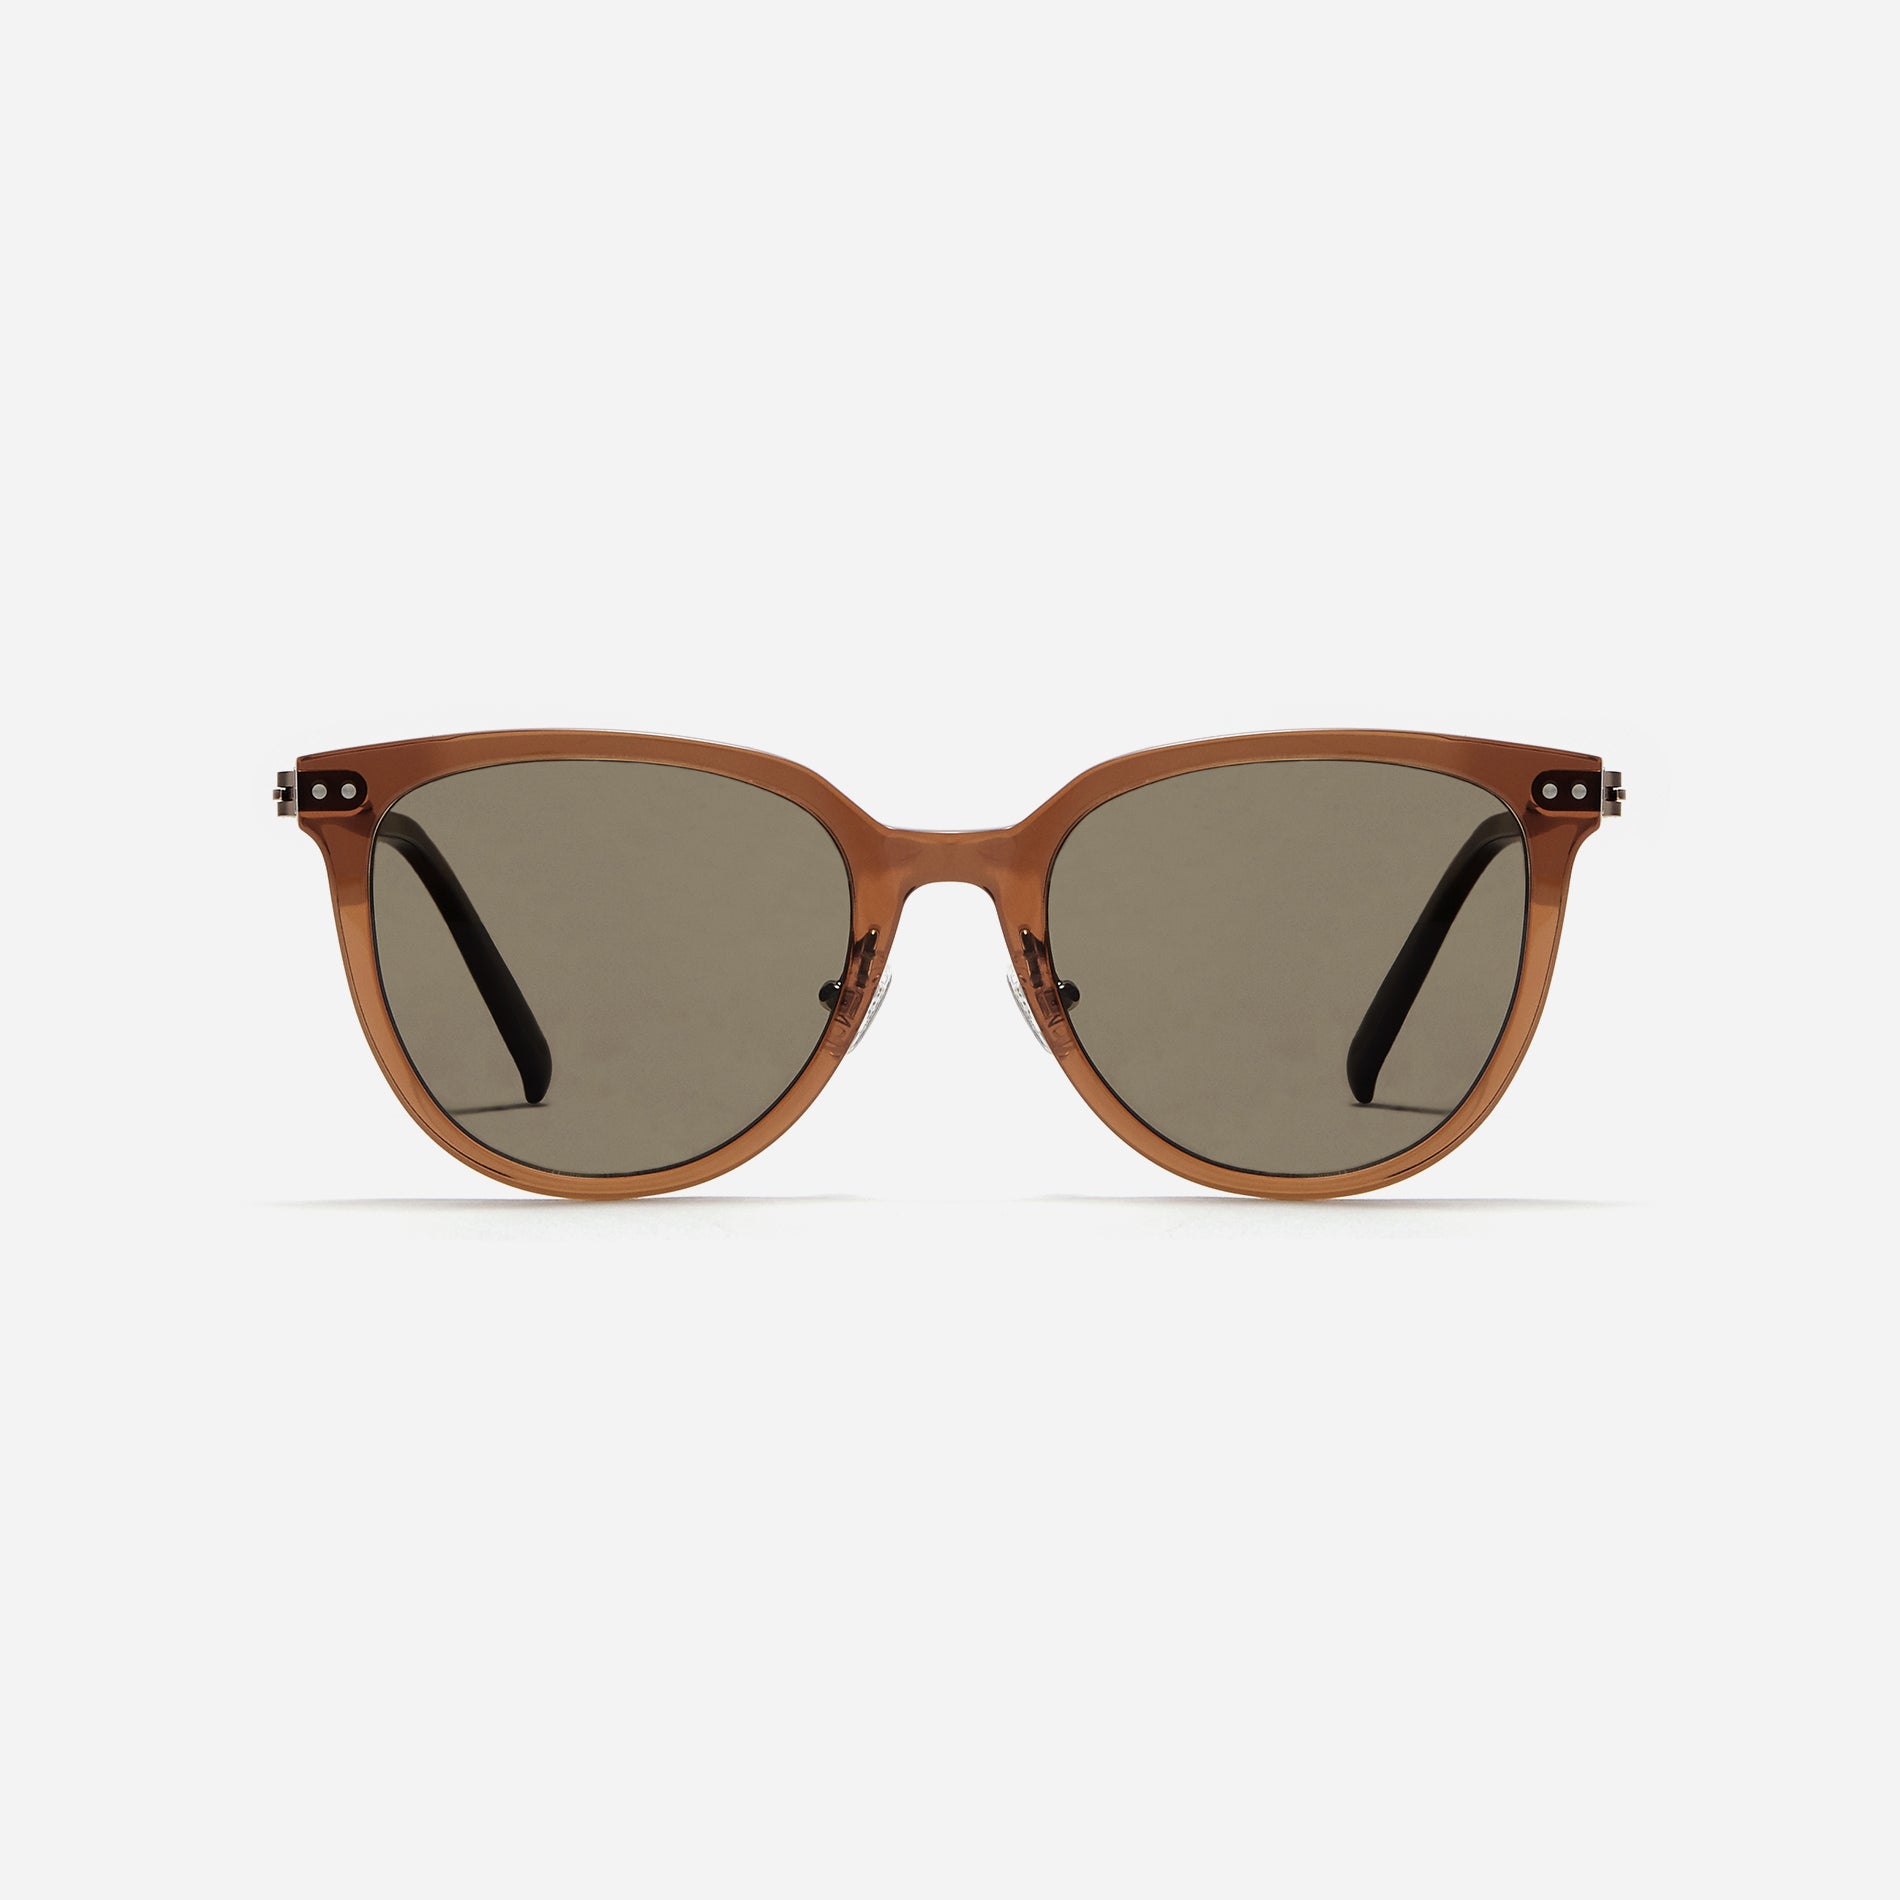 Round-shaped polarized sunglasses, representing CARIN’s POLARIZED line. Crafted from lightweight and durable bio-plastic to prevent slipping.